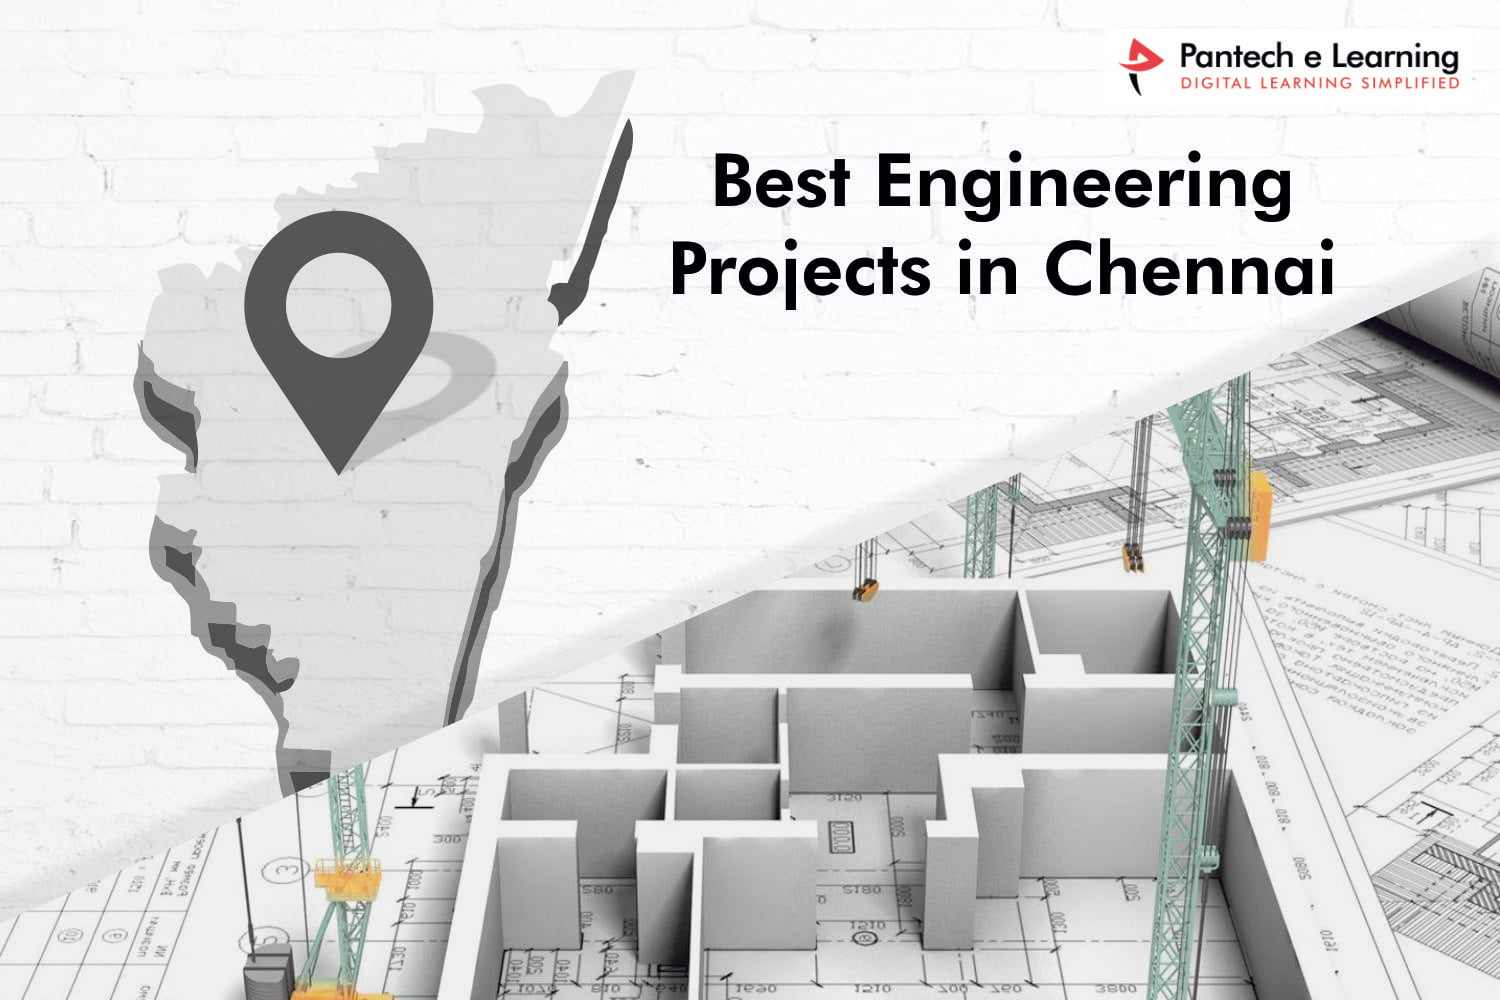 Best Engineering Projects in Chennai